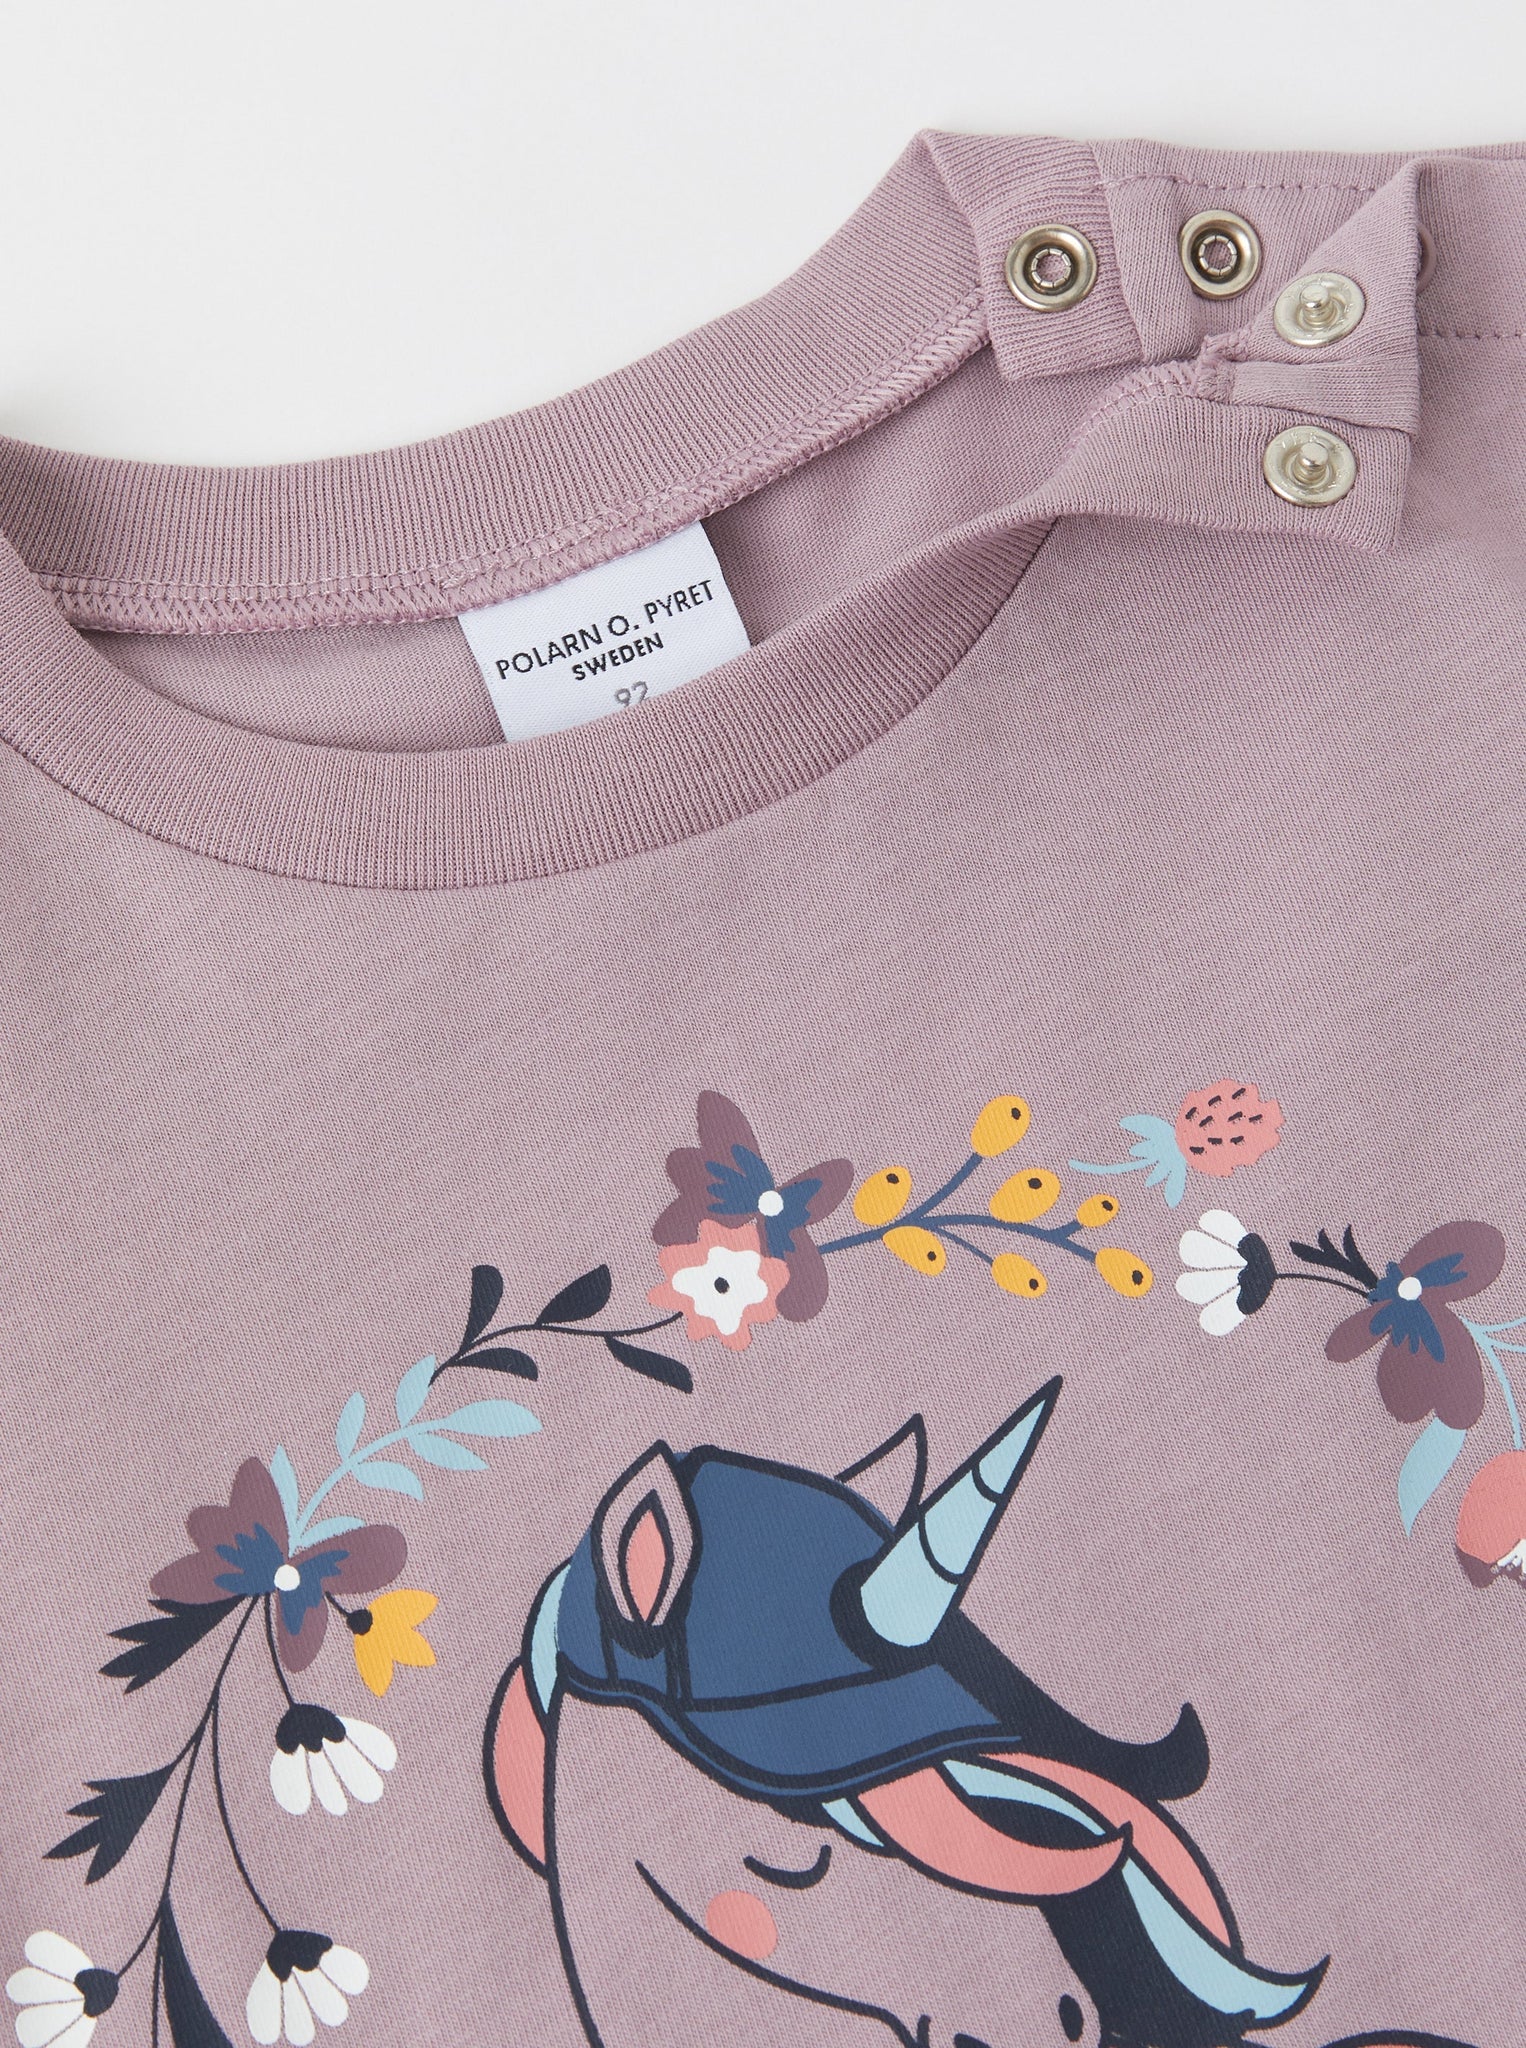 Unicorn Print Pink Kids T-Shirt from the Polarn O. Pyret kidswear collection. Nordic kids clothes made from sustainable sources.